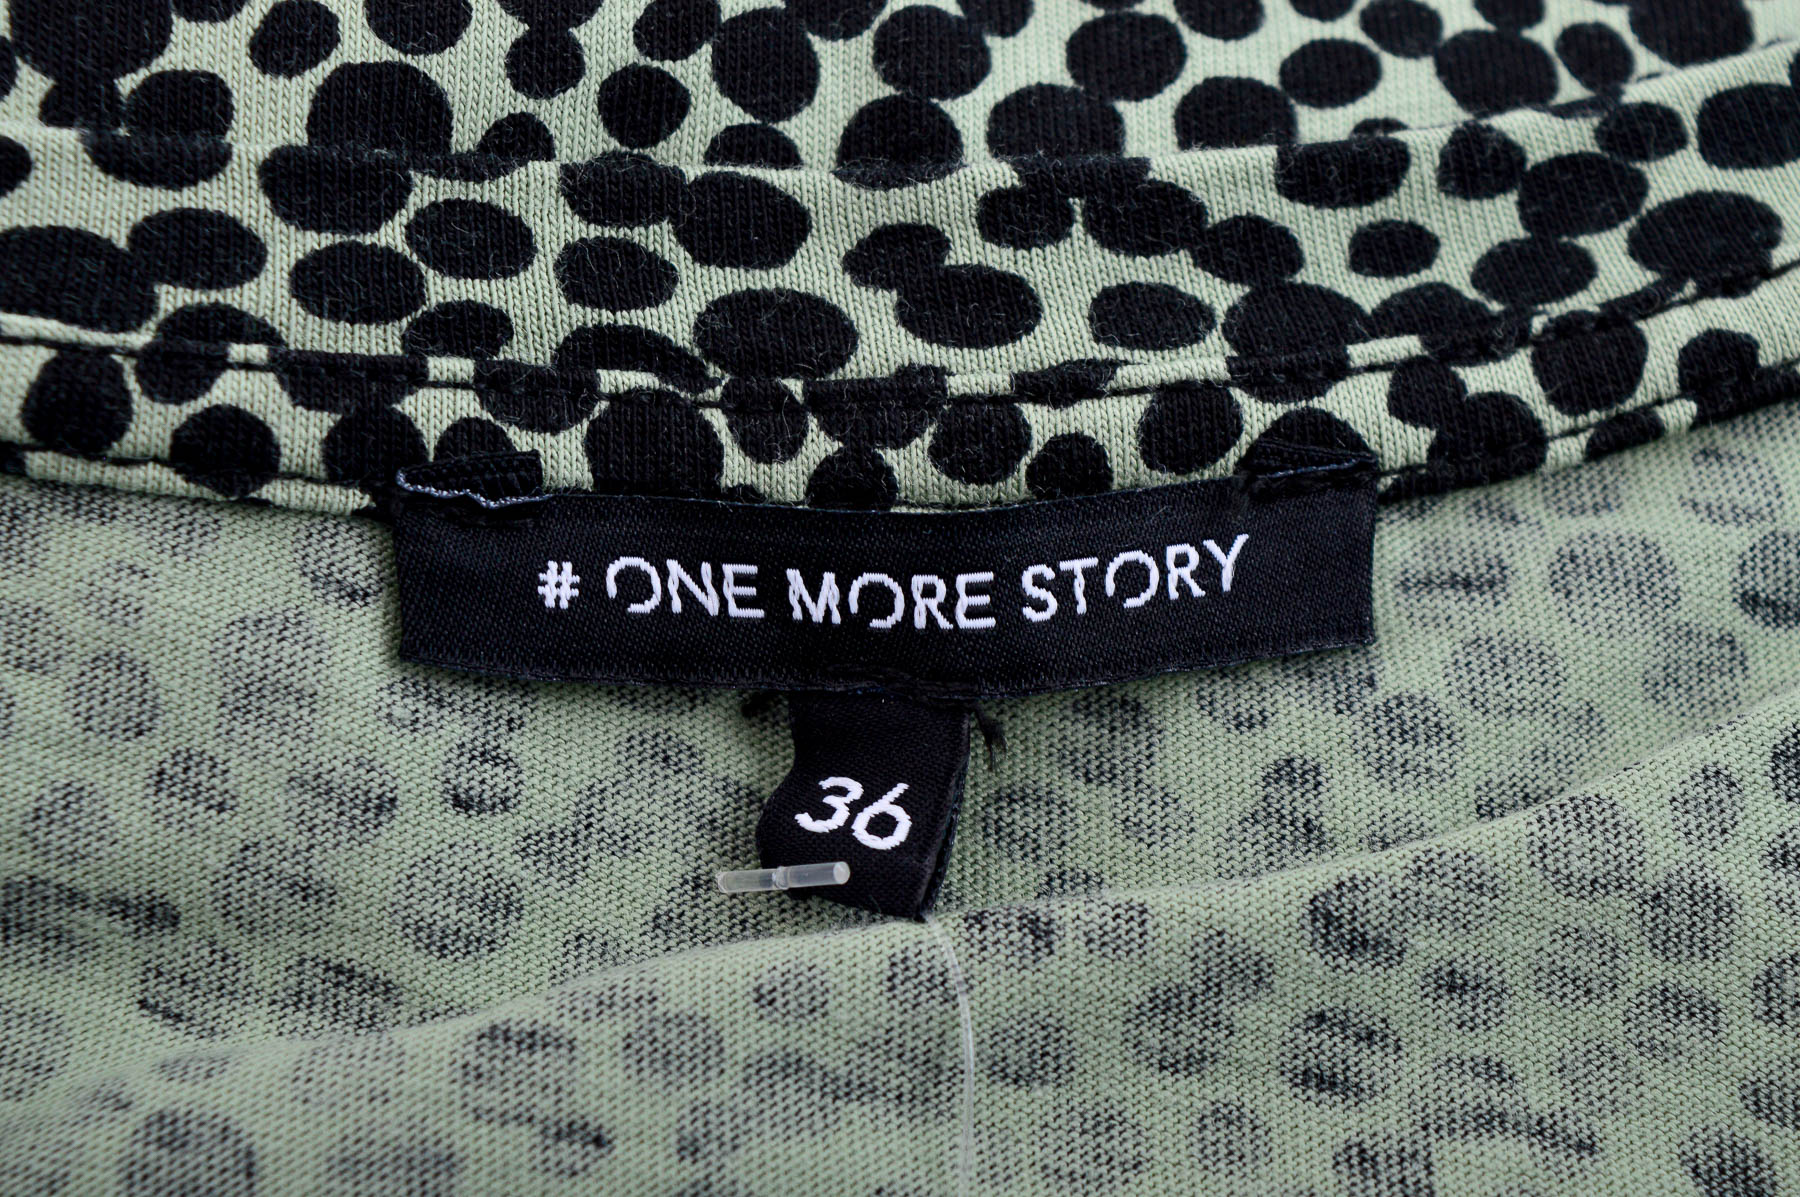 Women's t-shirt - # ONE MORE STORY - 2